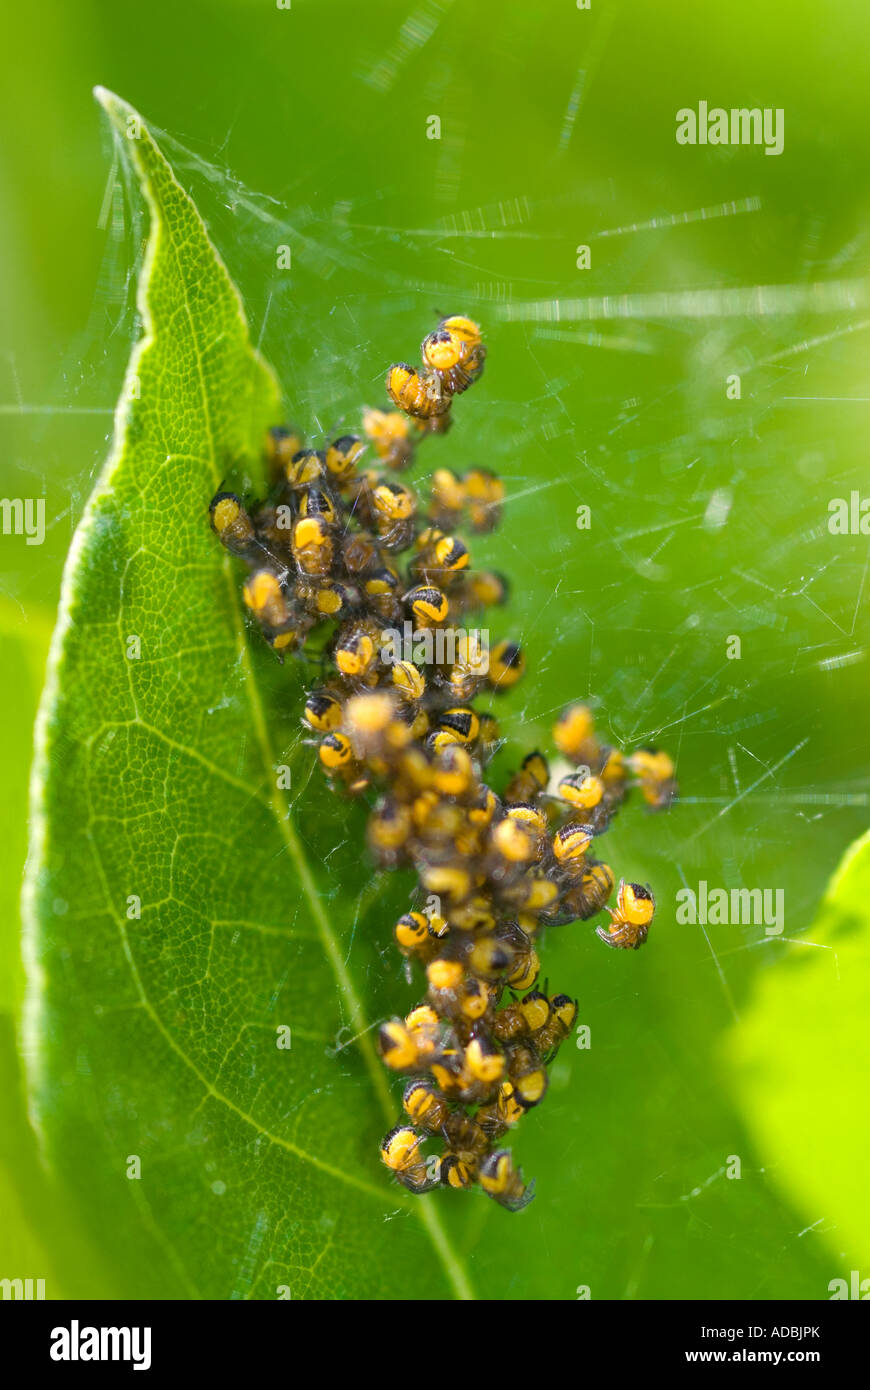 Vertical macro of young baby spiderlings of the common garden spider 'araneus diadematus' in a protective group on a leaf Stock Photo